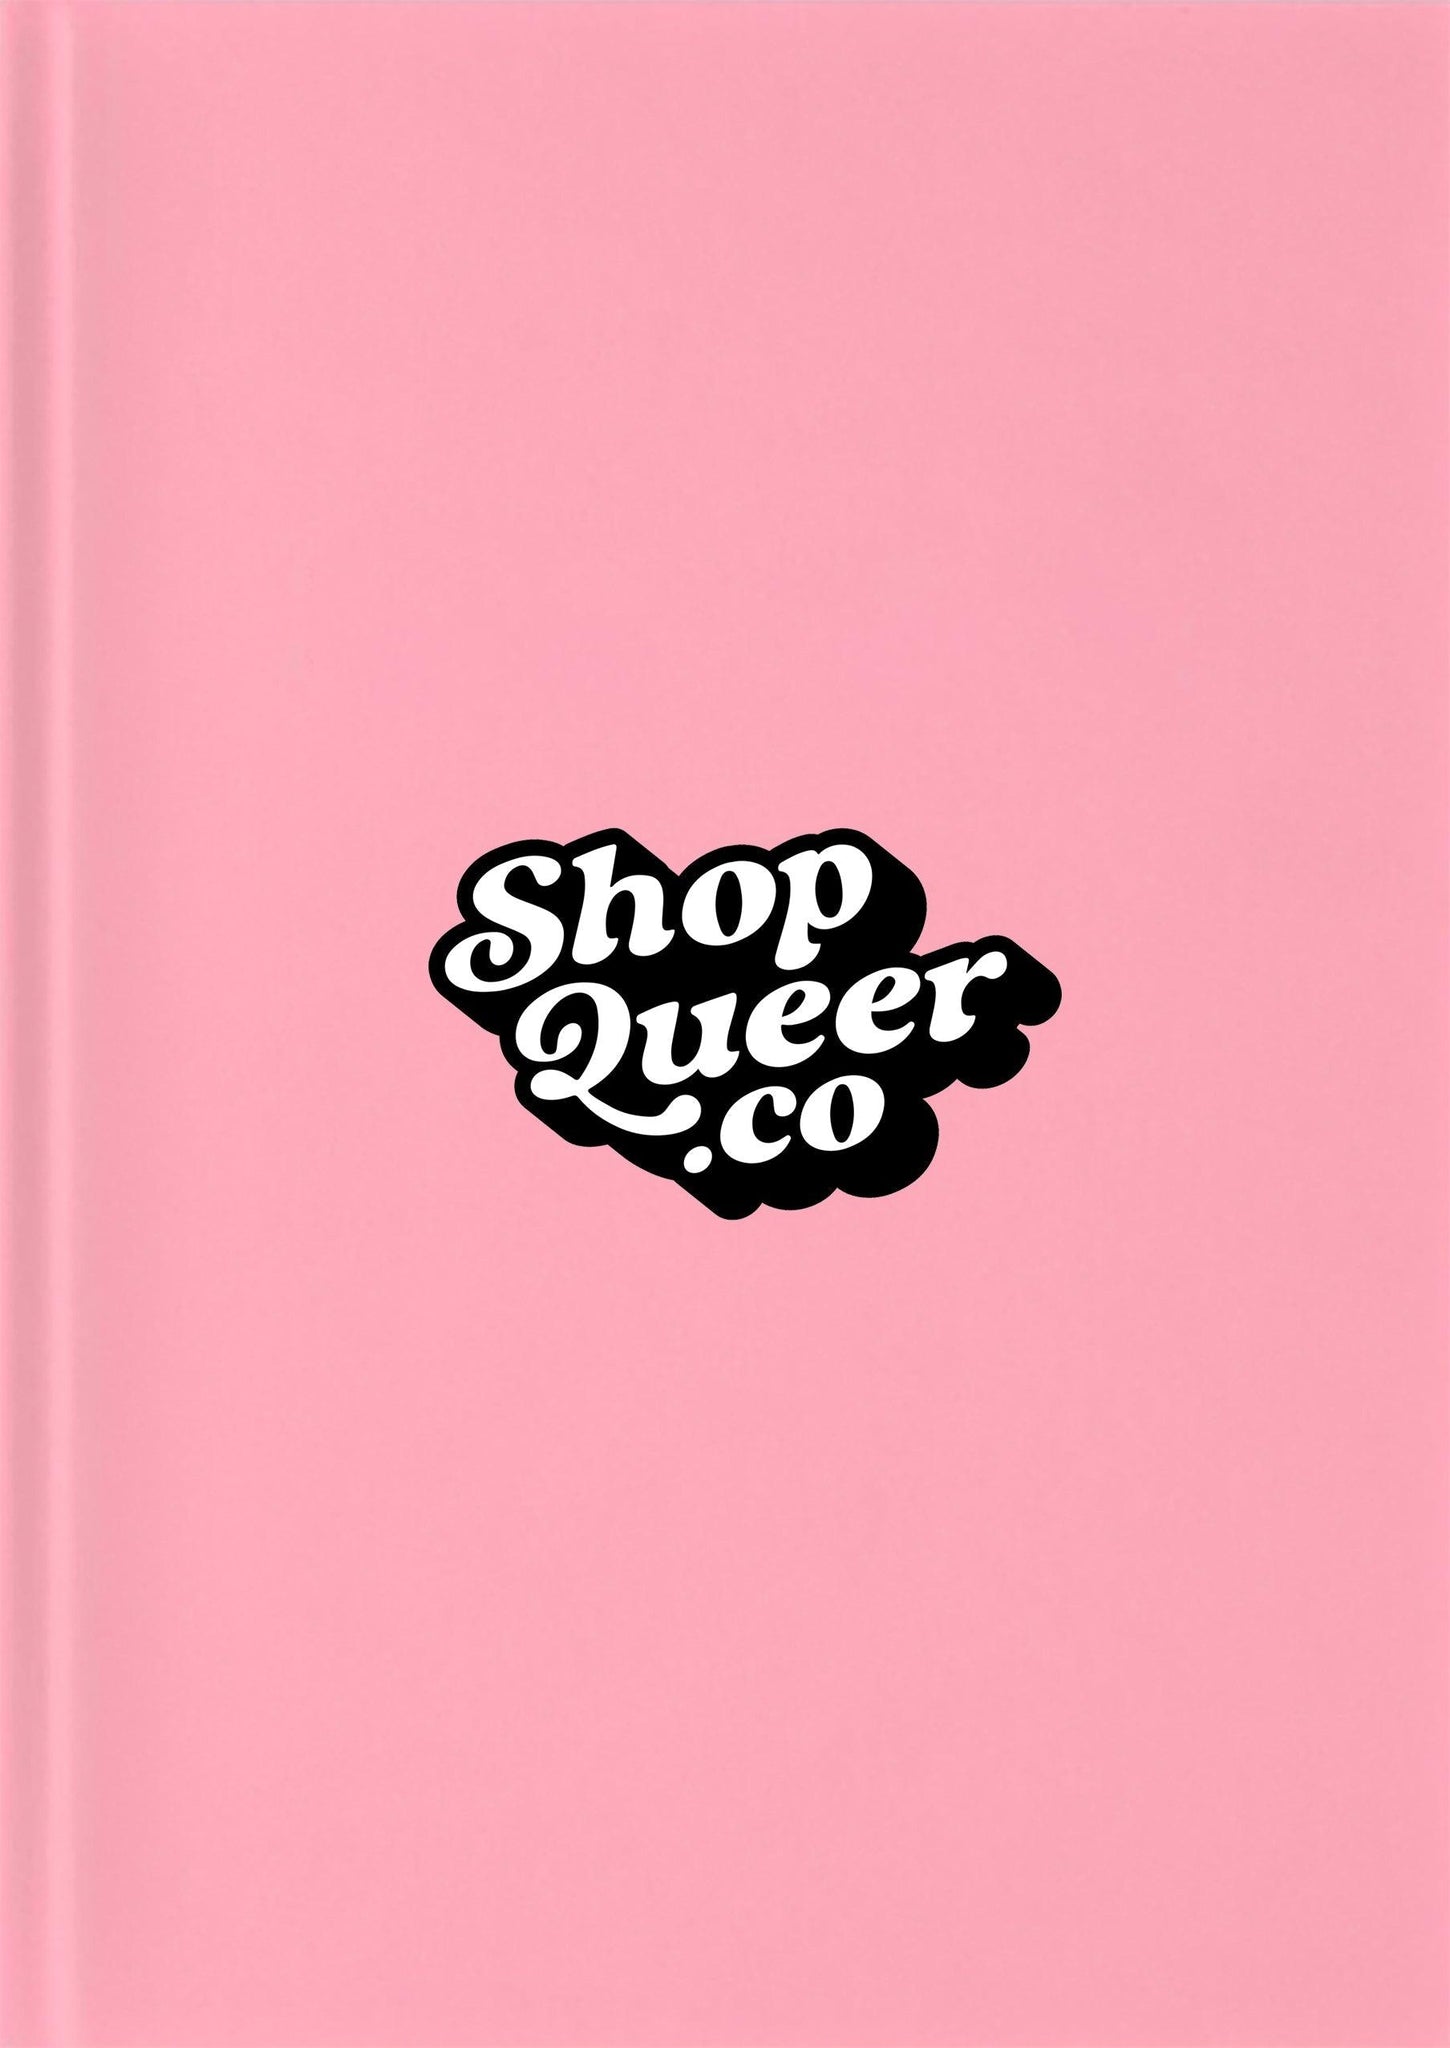 Queerstory: An Infographic History of the Fight for LGBTQ+ Rights - ShopQueer.co